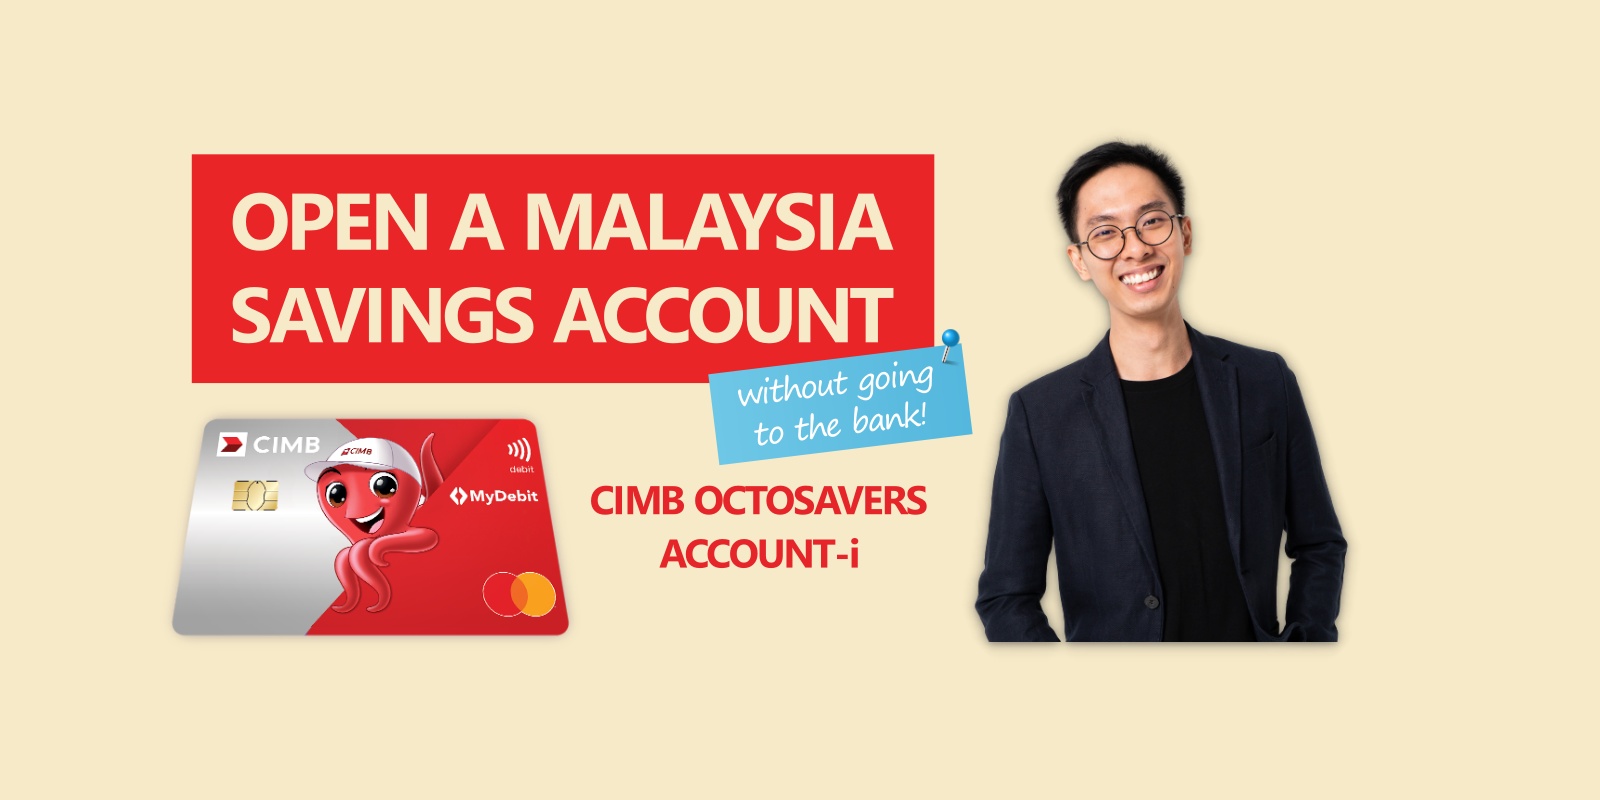 How to open a Malaysia savings account online